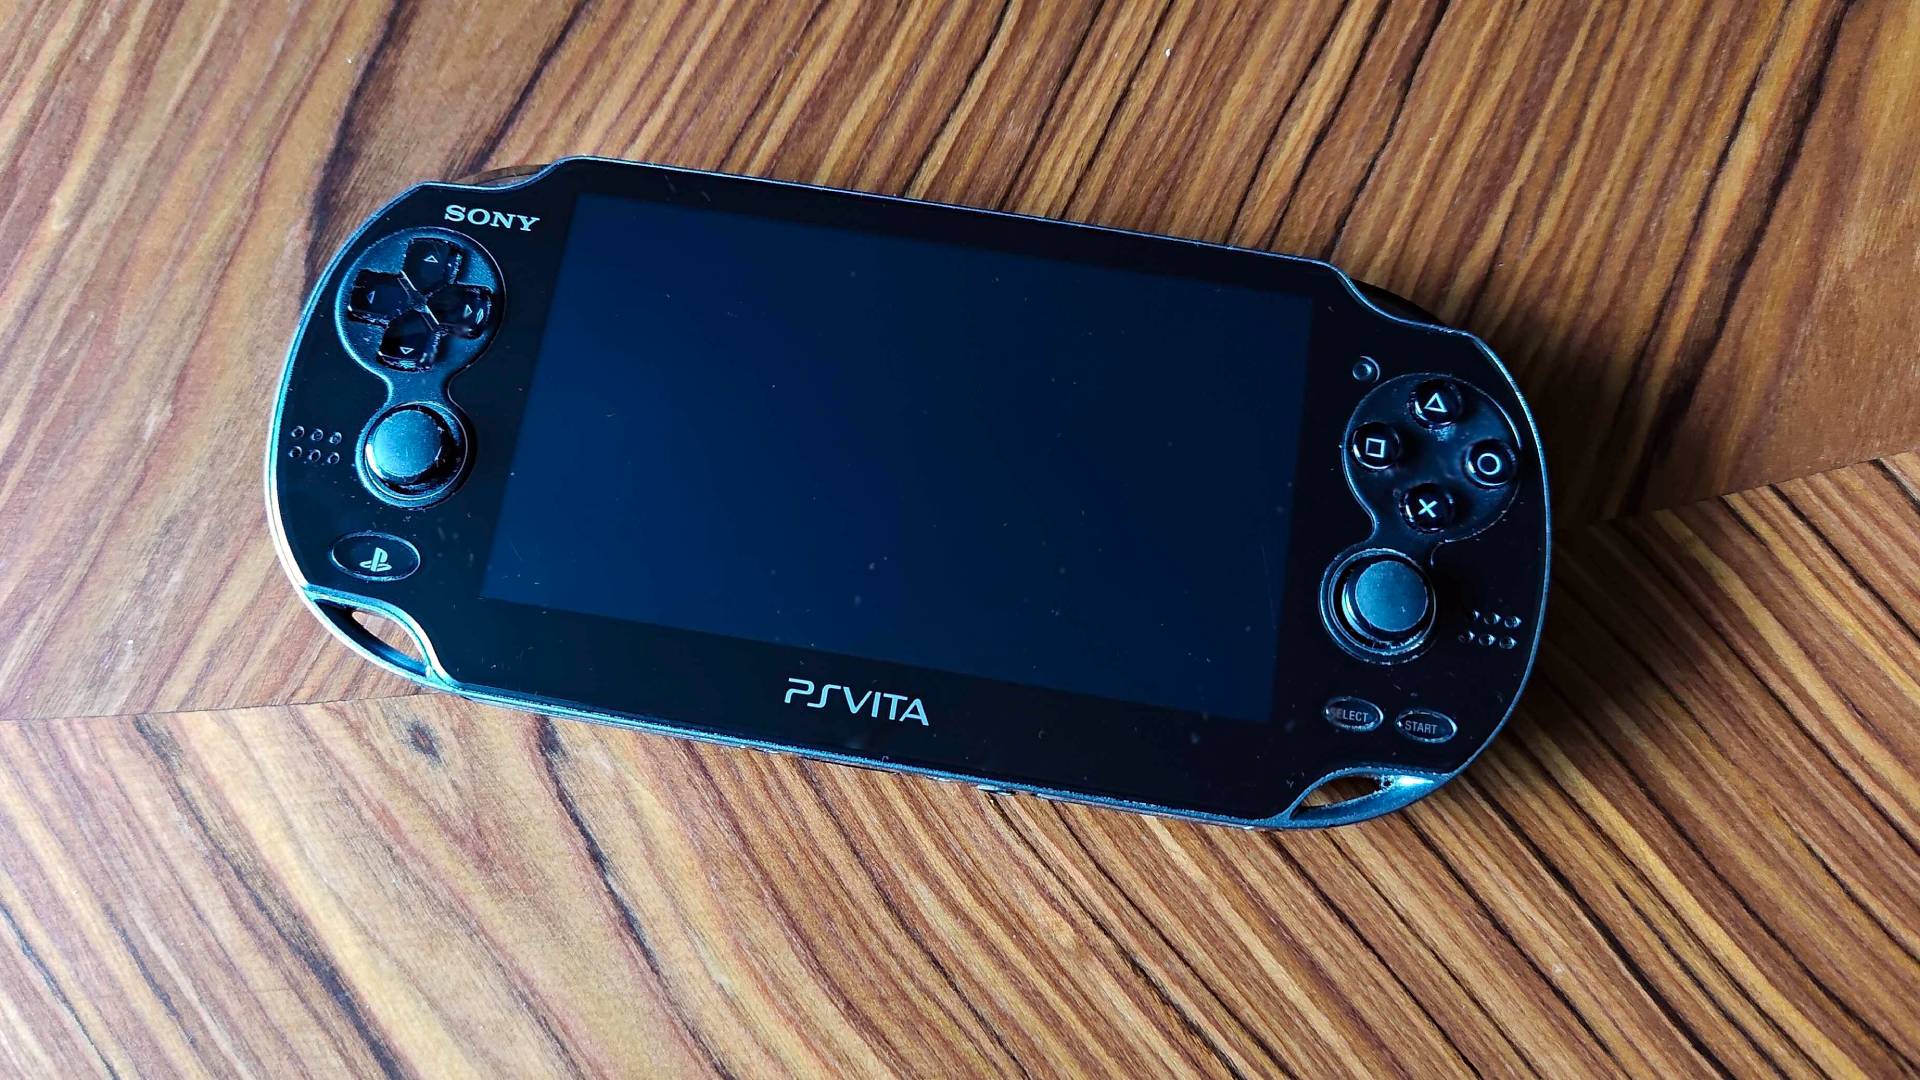 PlayStation Vita 2 rumors are spiralling, but it's not what you